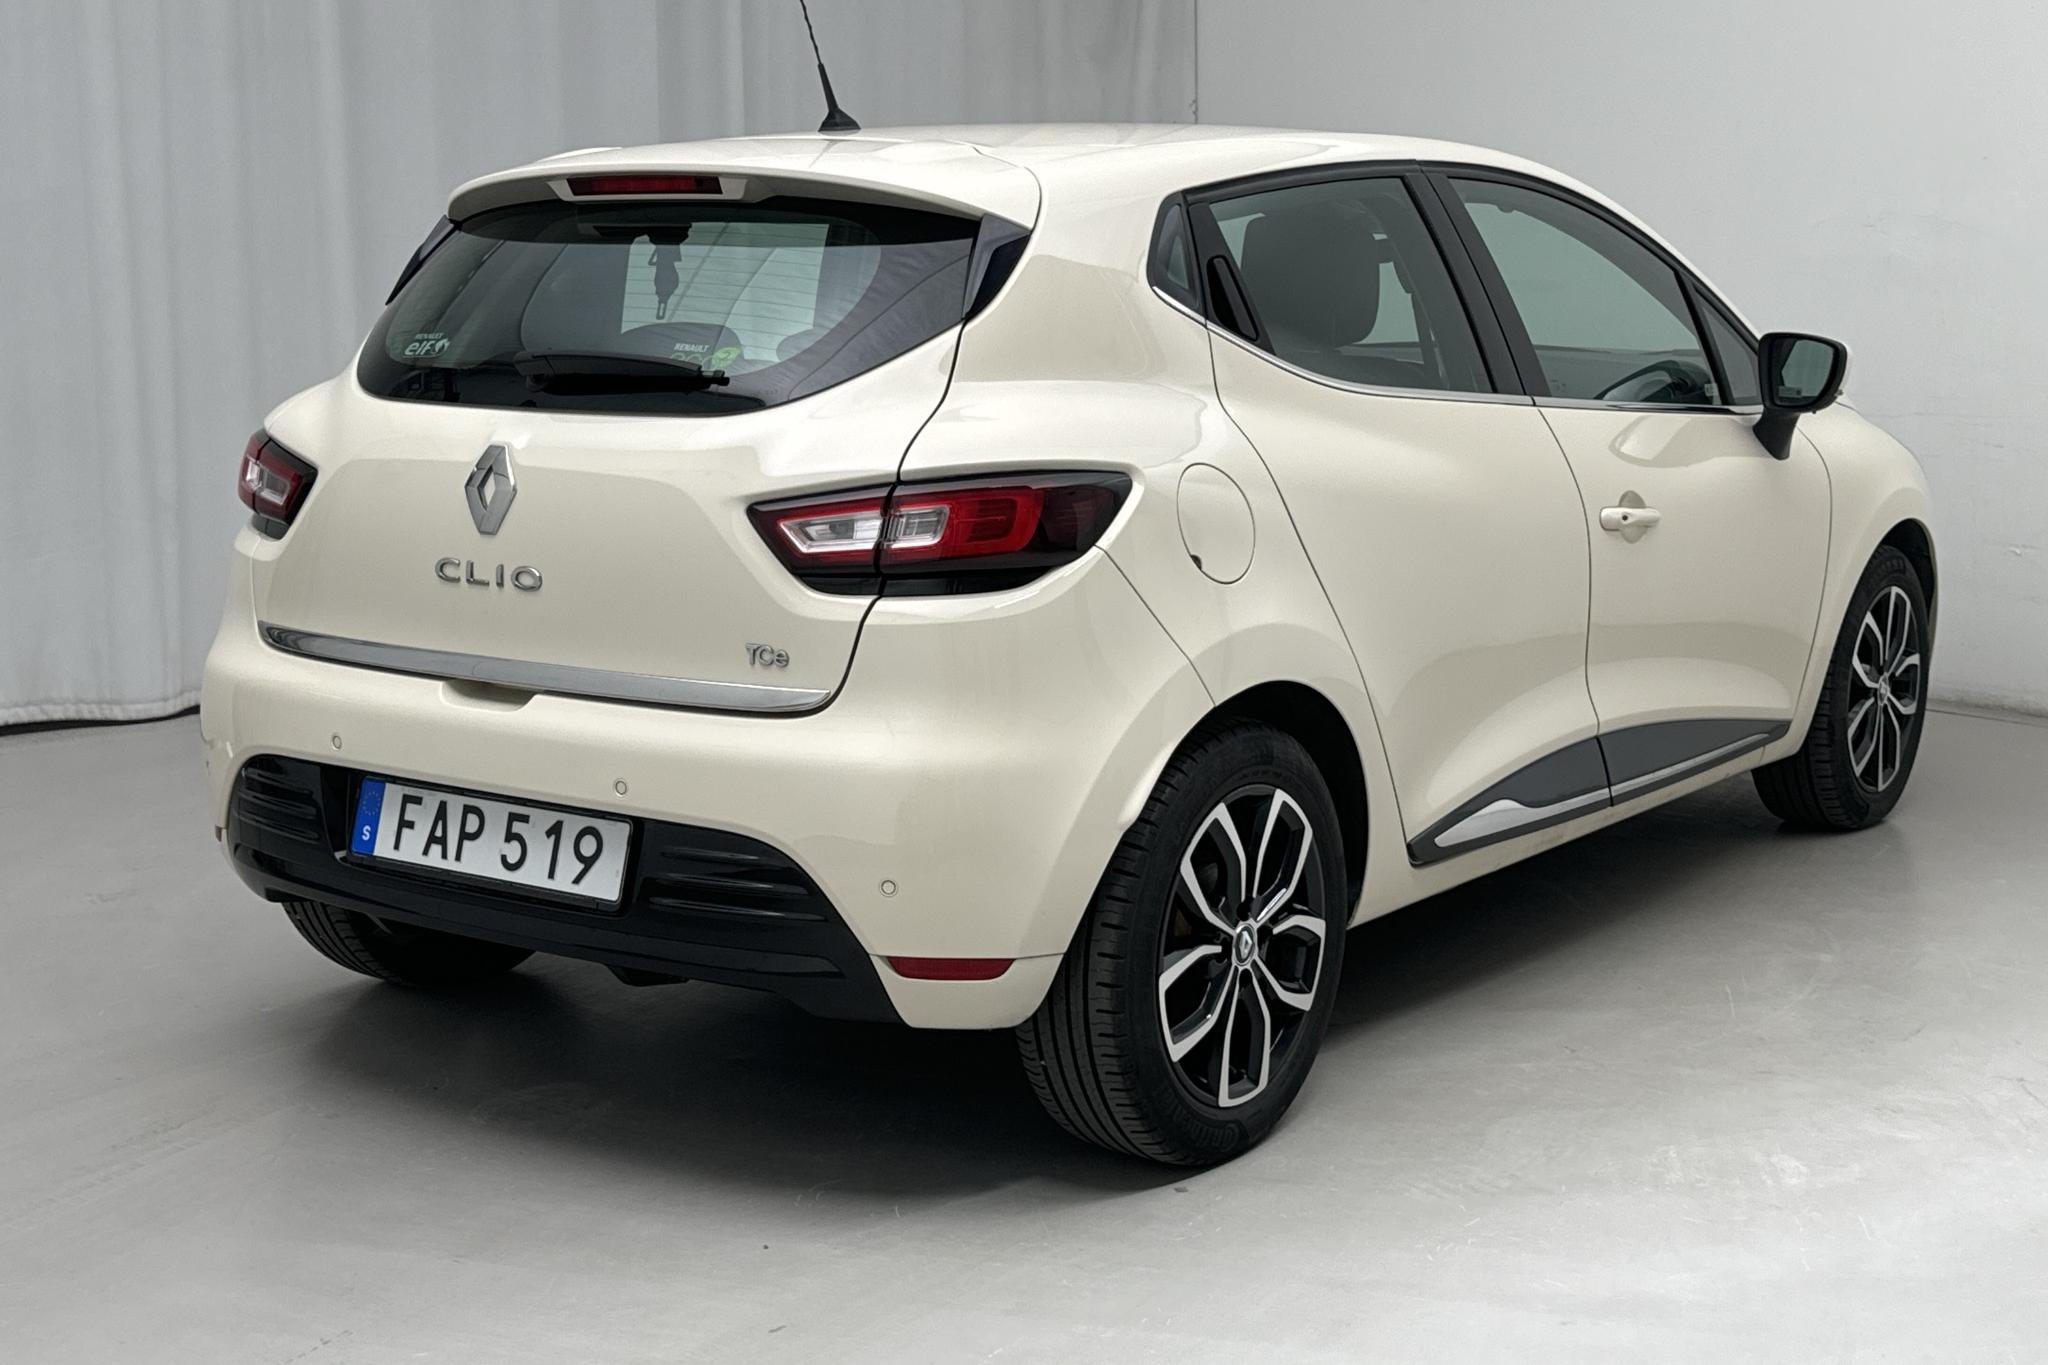 Renault Clio IV 0.9 TCe 90 5dr (90hk) - 38 770 km - Manual - white - 2017